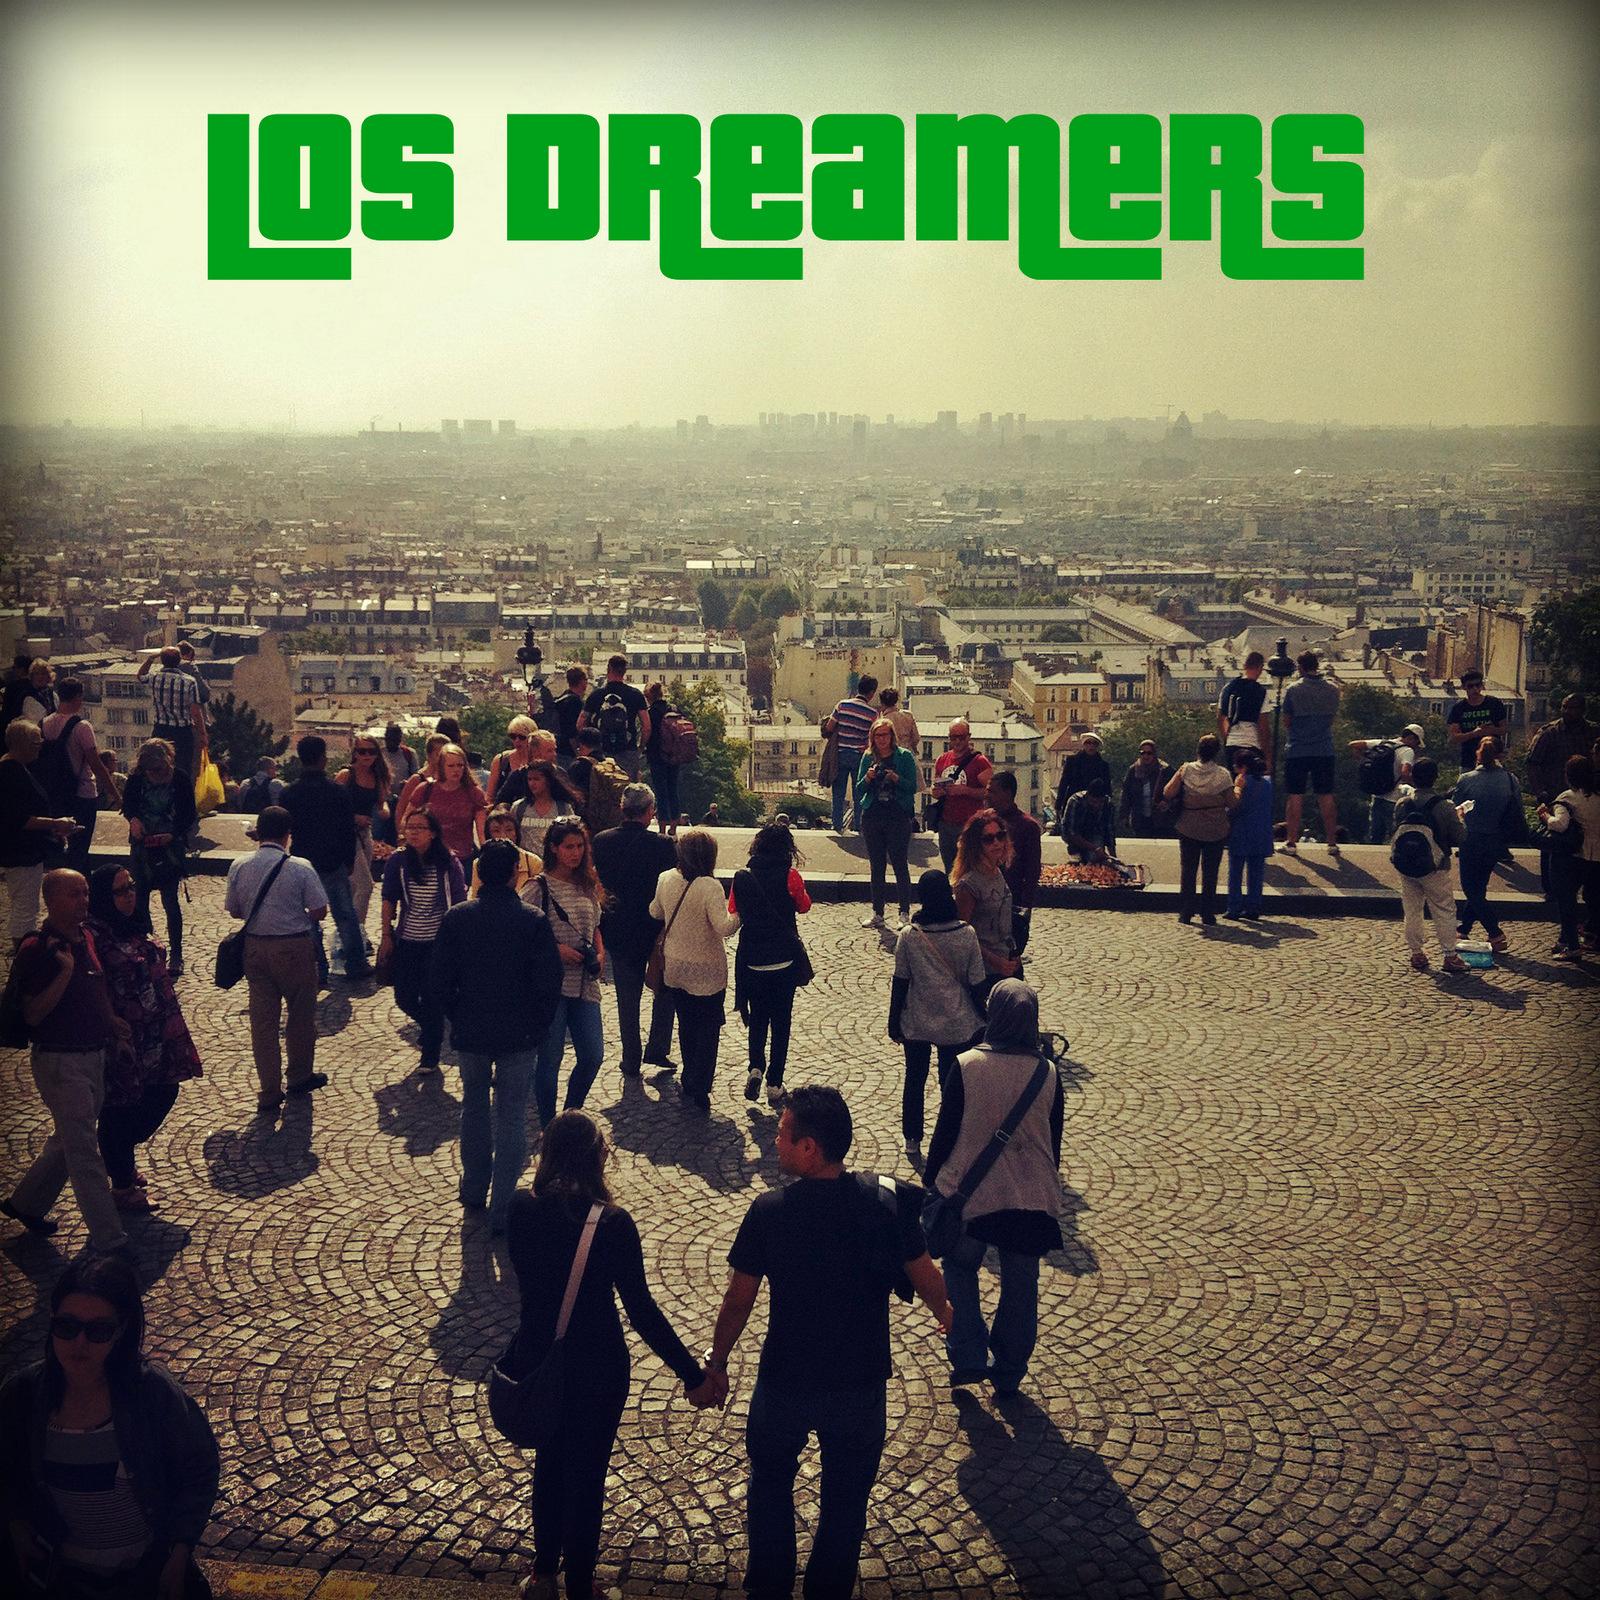 Photo: &#039;Los Dreamers&#039; self-titled album cover